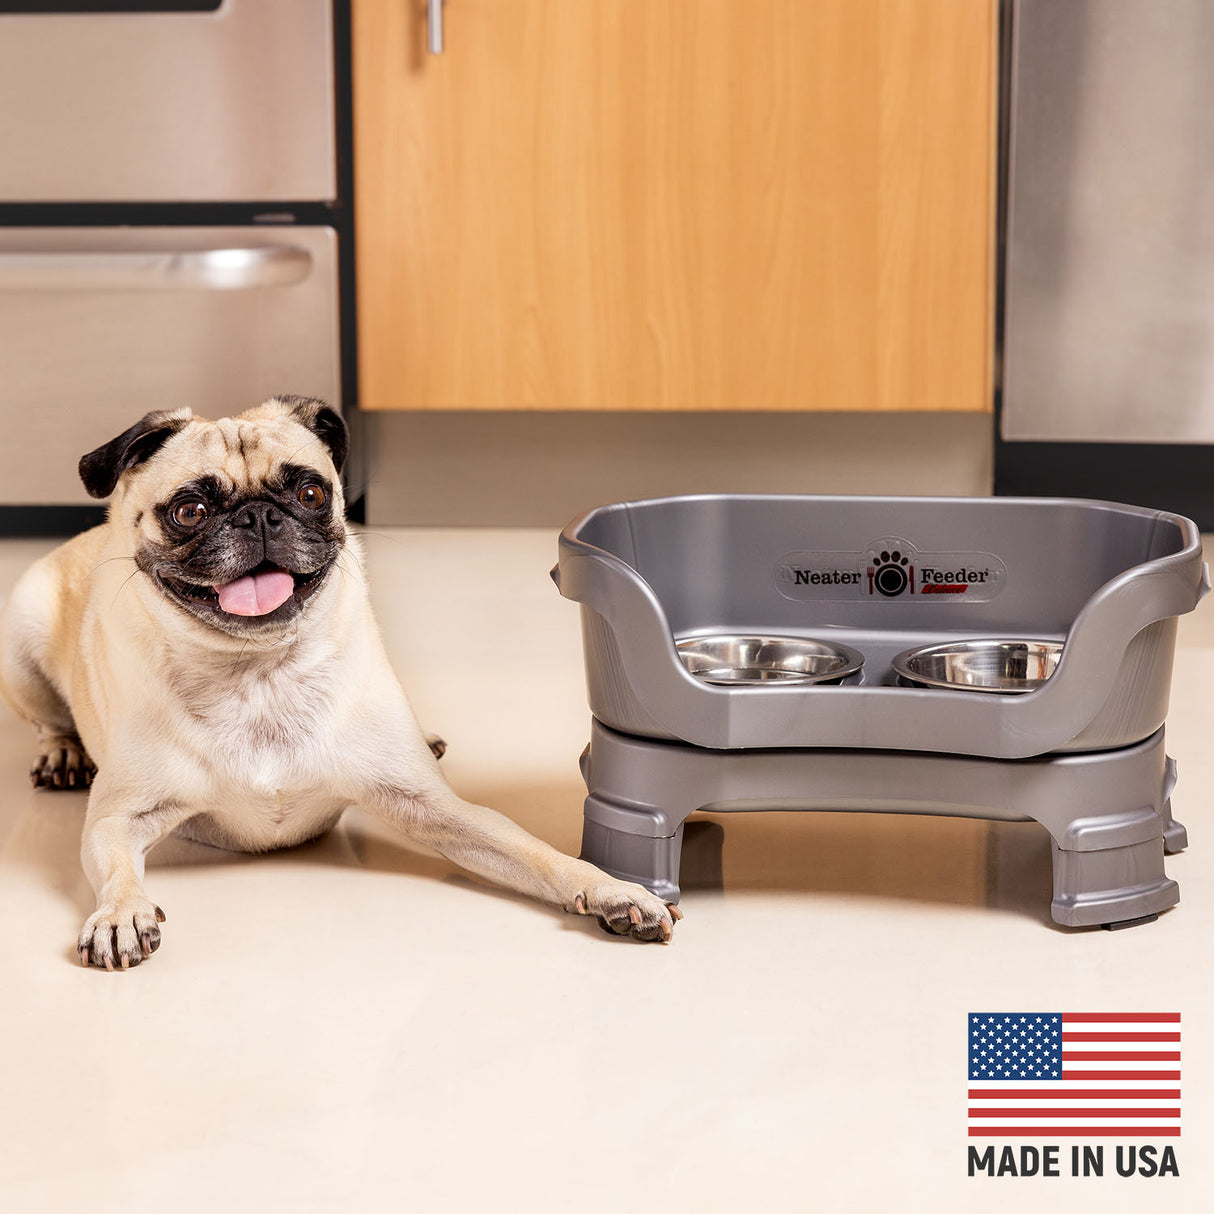 Pug next to Gunmetal Neater Feeder Deluxe - Made in the USA